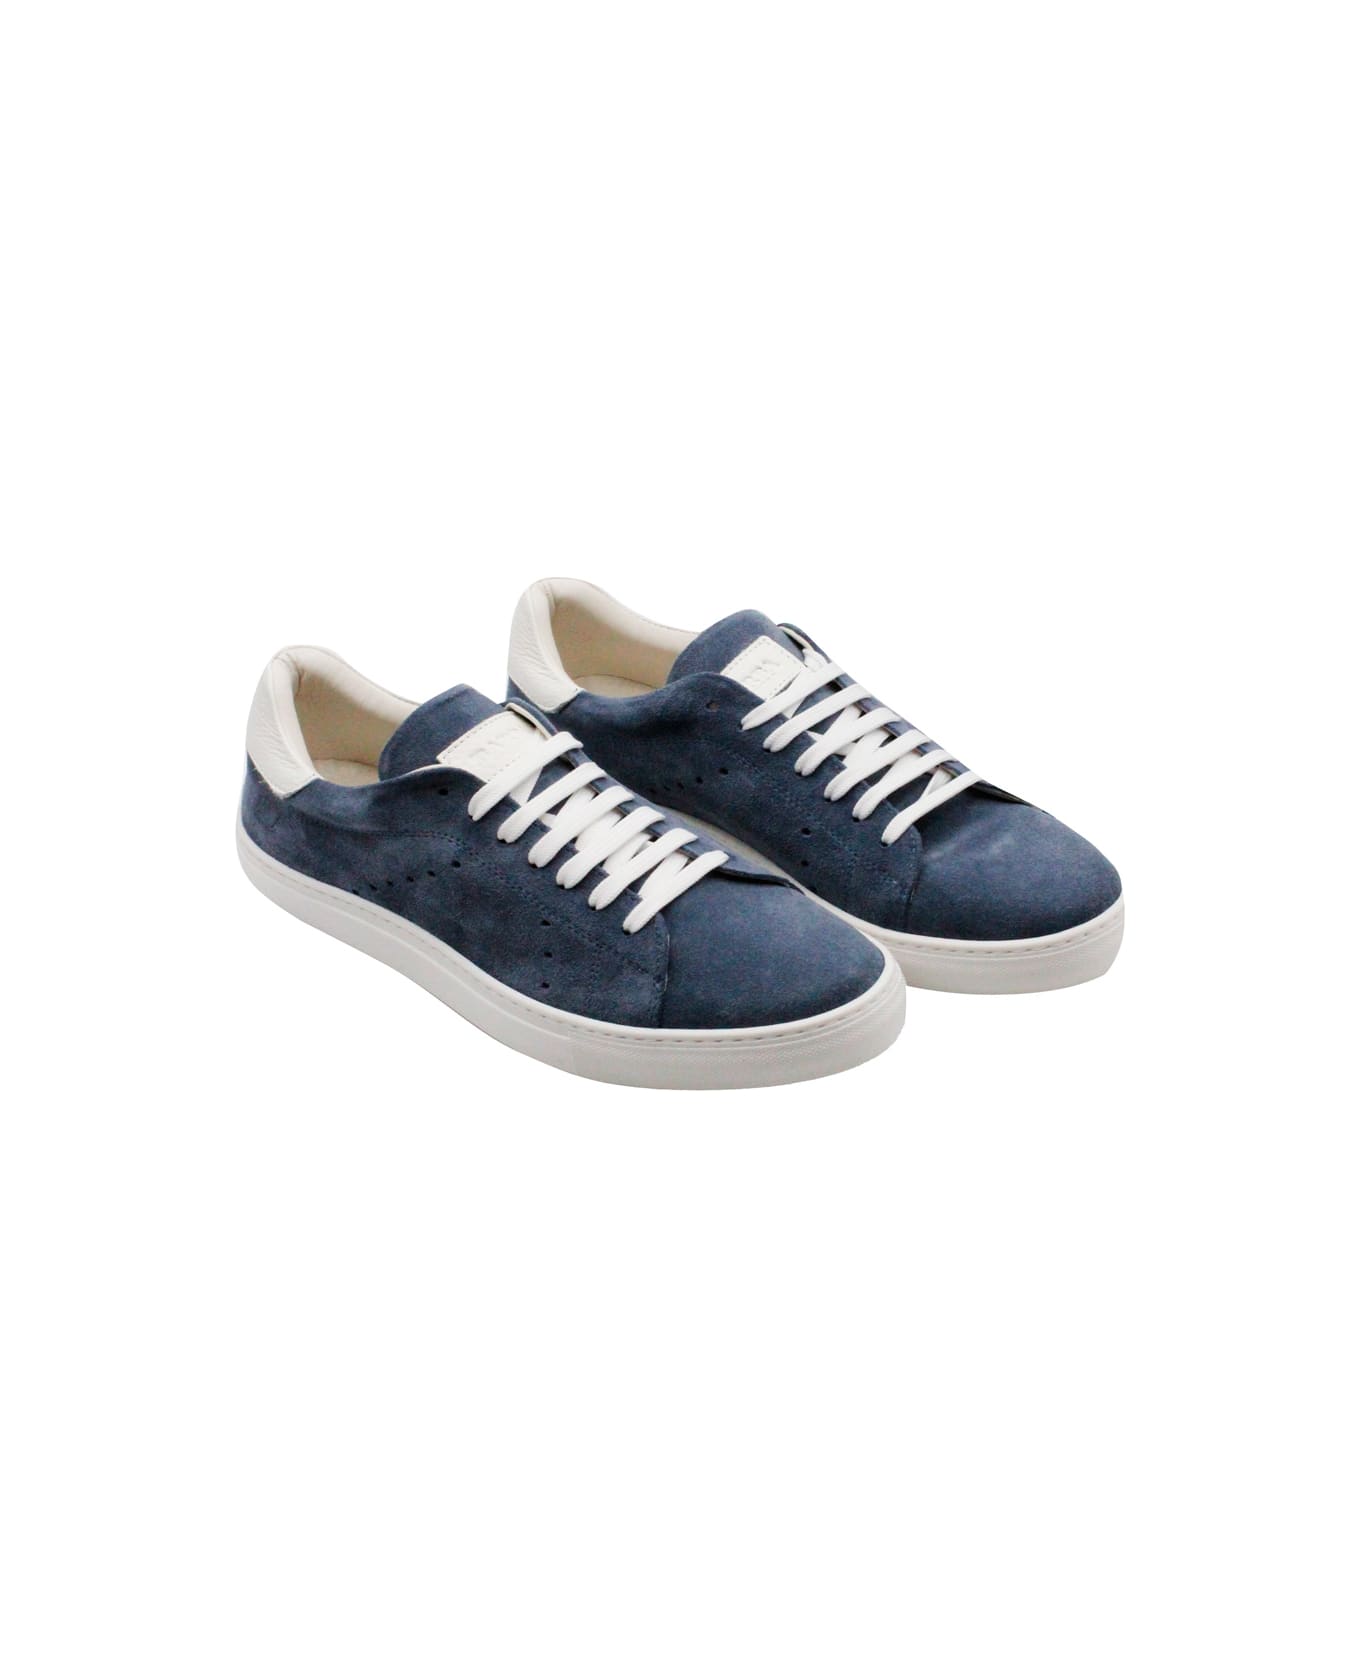 Barba Napoli Sneakers In Soft And Fine Perforated Suede With Lace Closure And Leather Rear Part - Light Blu スニーカー